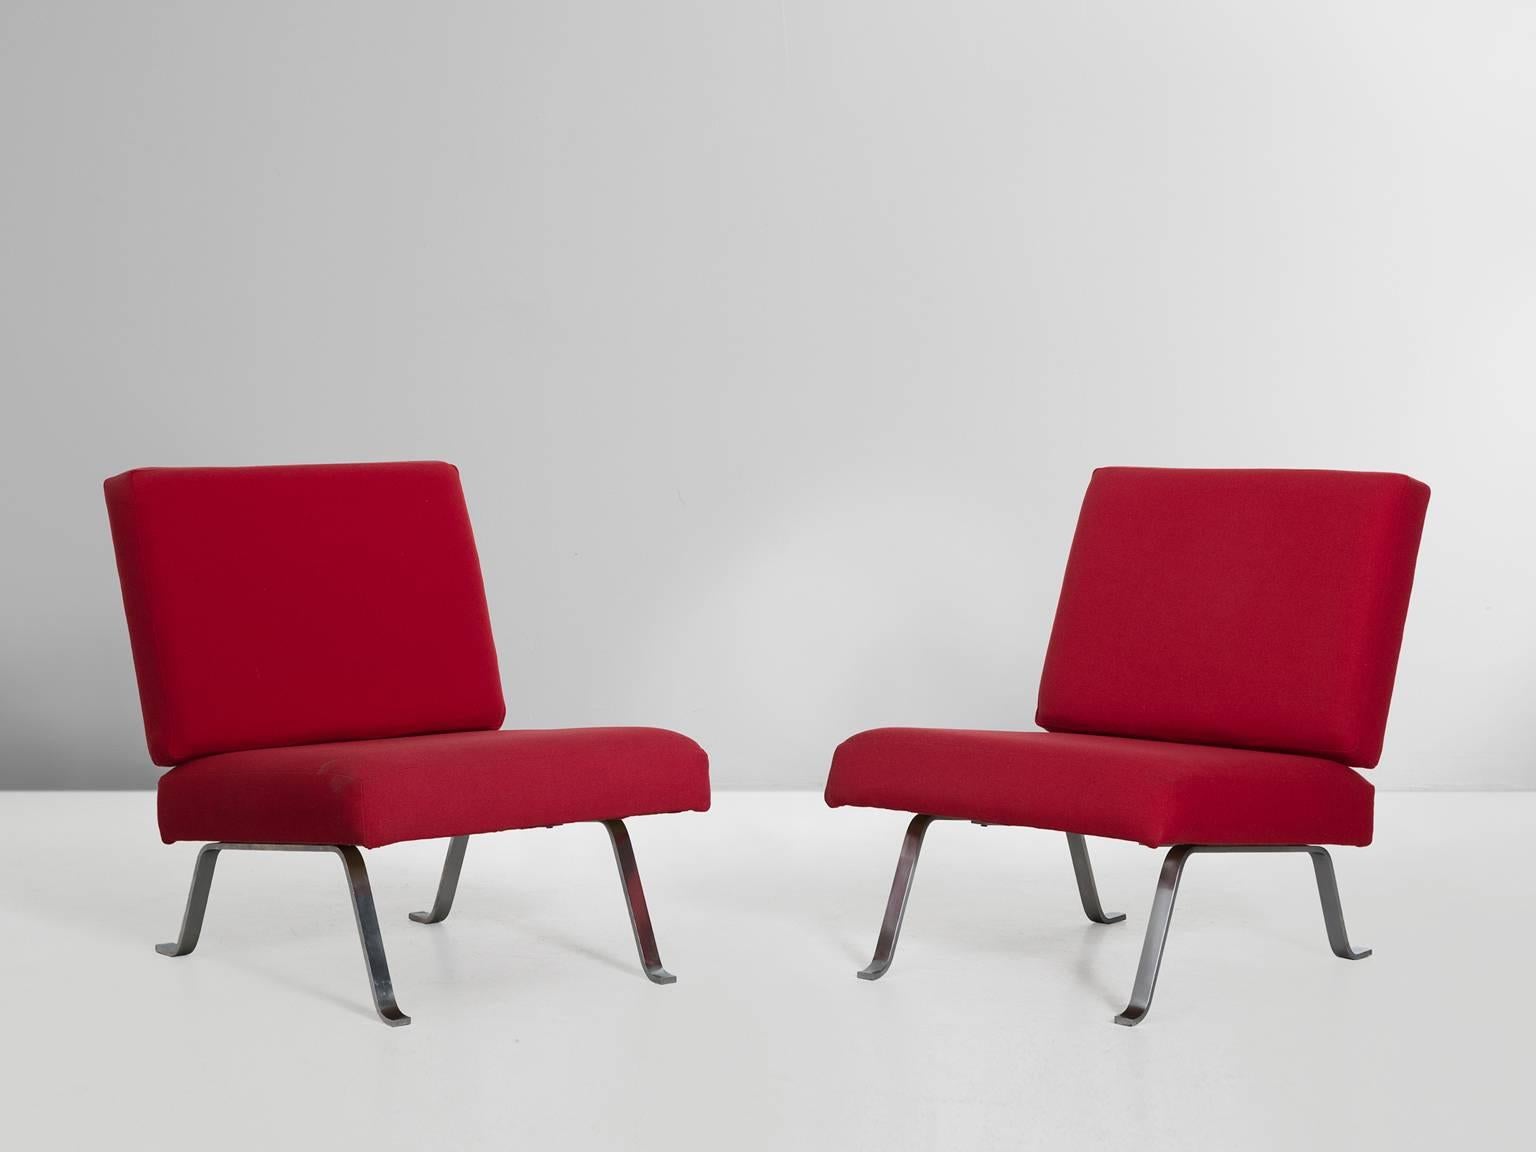 Set of two easy chairs, in steel and fabric by Hein Salomonson for AP Originals, the Netherlands, 1960s.

Set of two lounge chairs by designer Hein Salomonson for the Dutch manufacturer Polak. These chairs have a very modern expression. The design